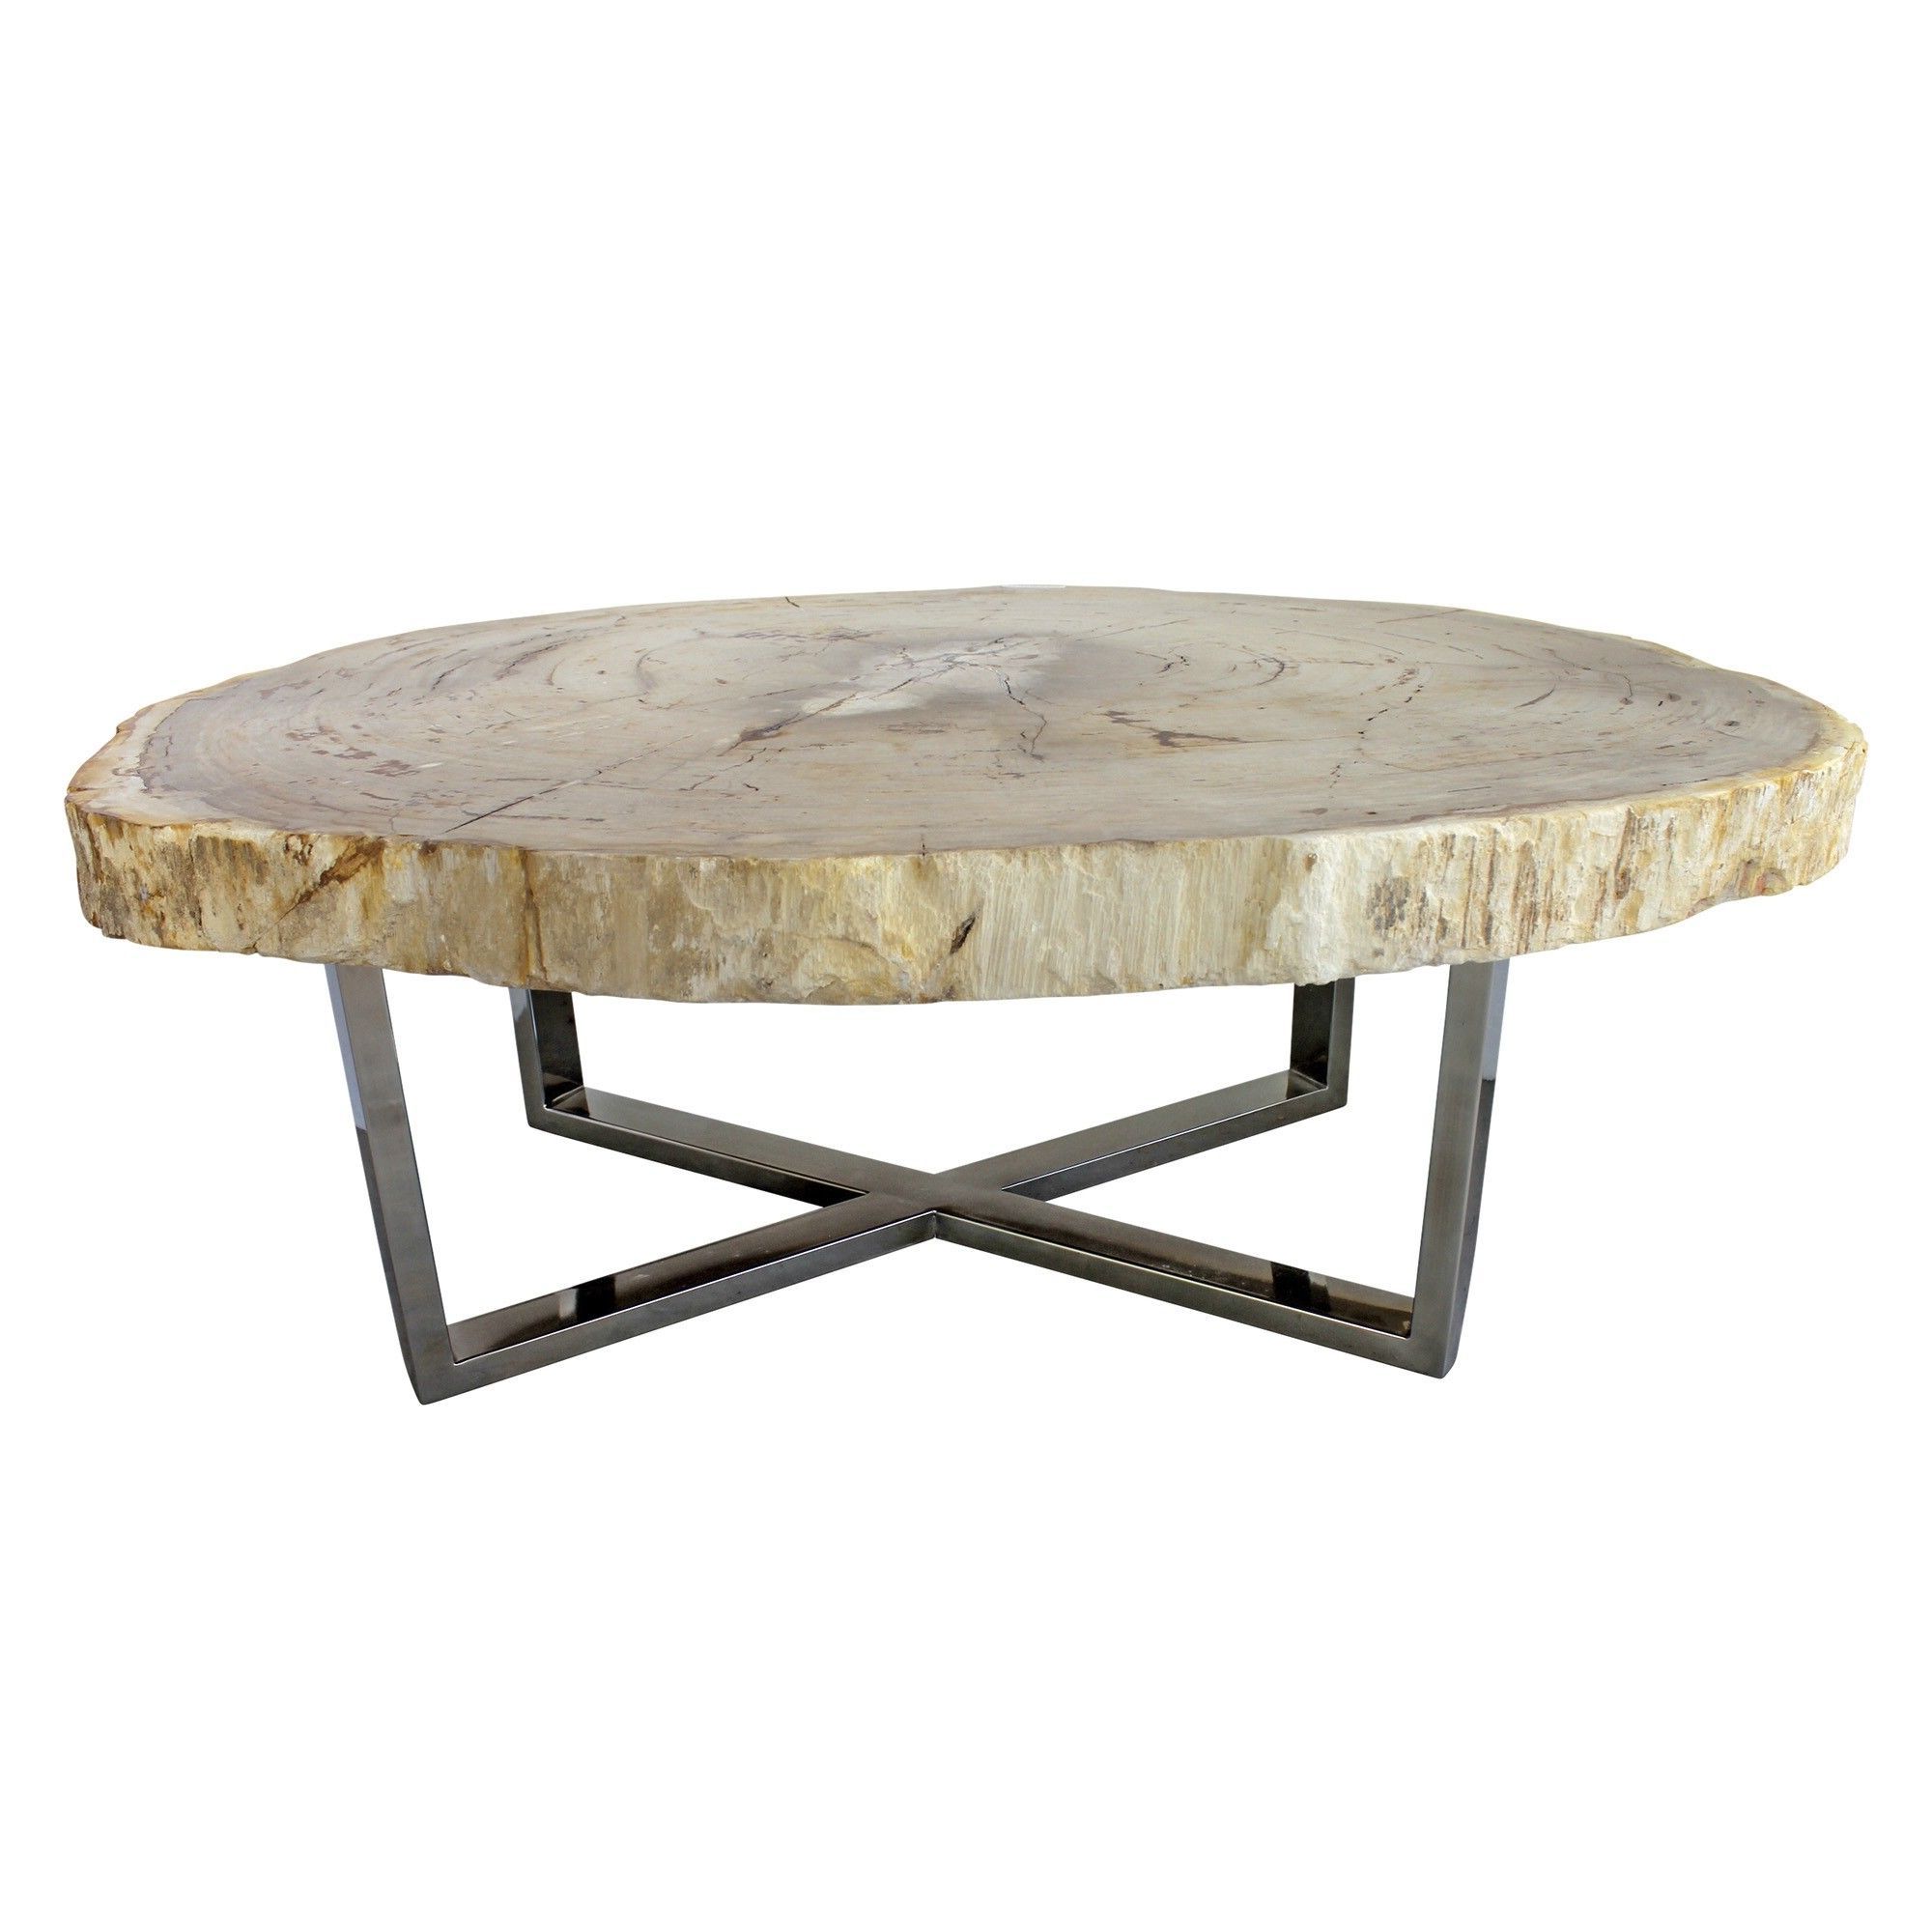 Best And Newest Light Natural Drum Coffee Tables With Regard To A Coffee Table Featuring A Solid, Light Natural Edge (View 9 of 20)